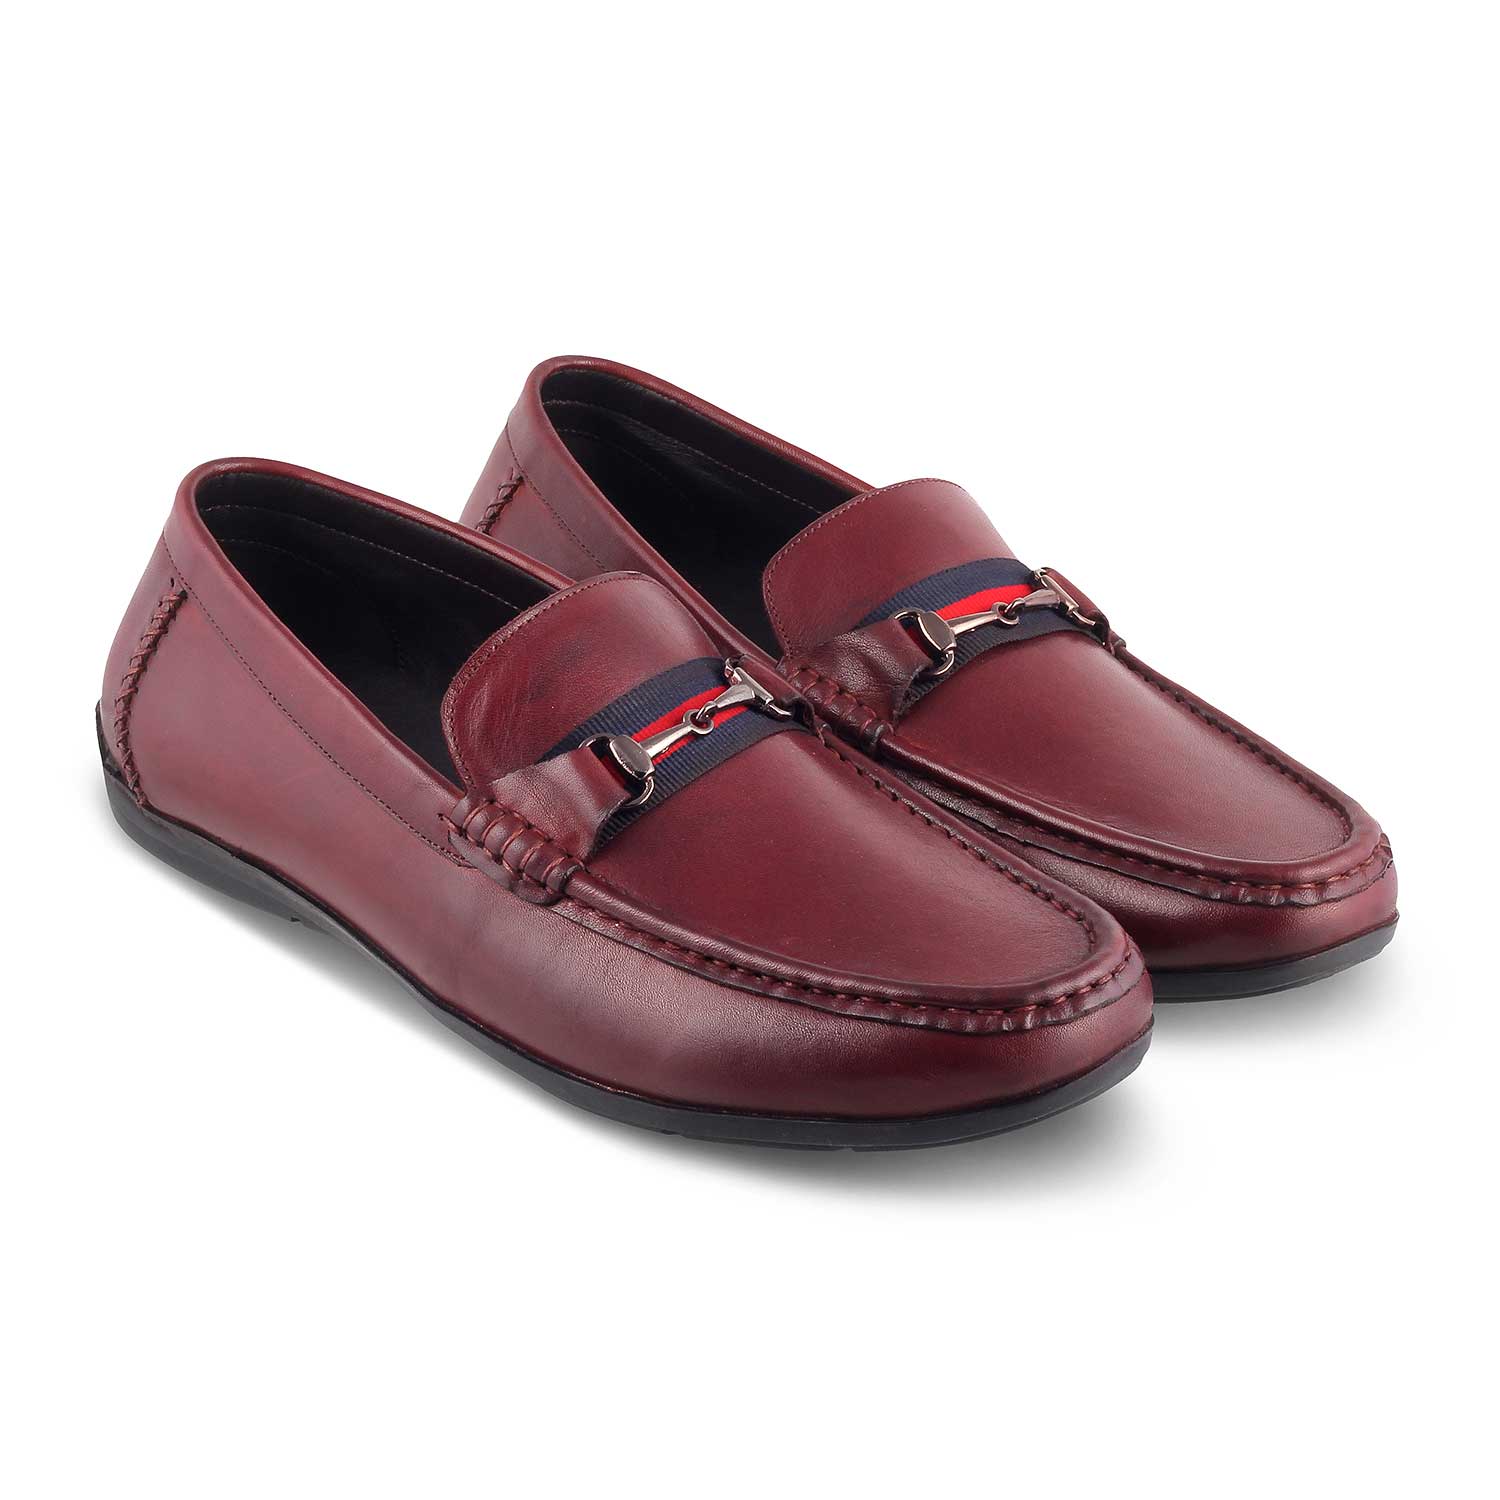 The Crada Wine Men's Leather Driving Loafers Tresmode